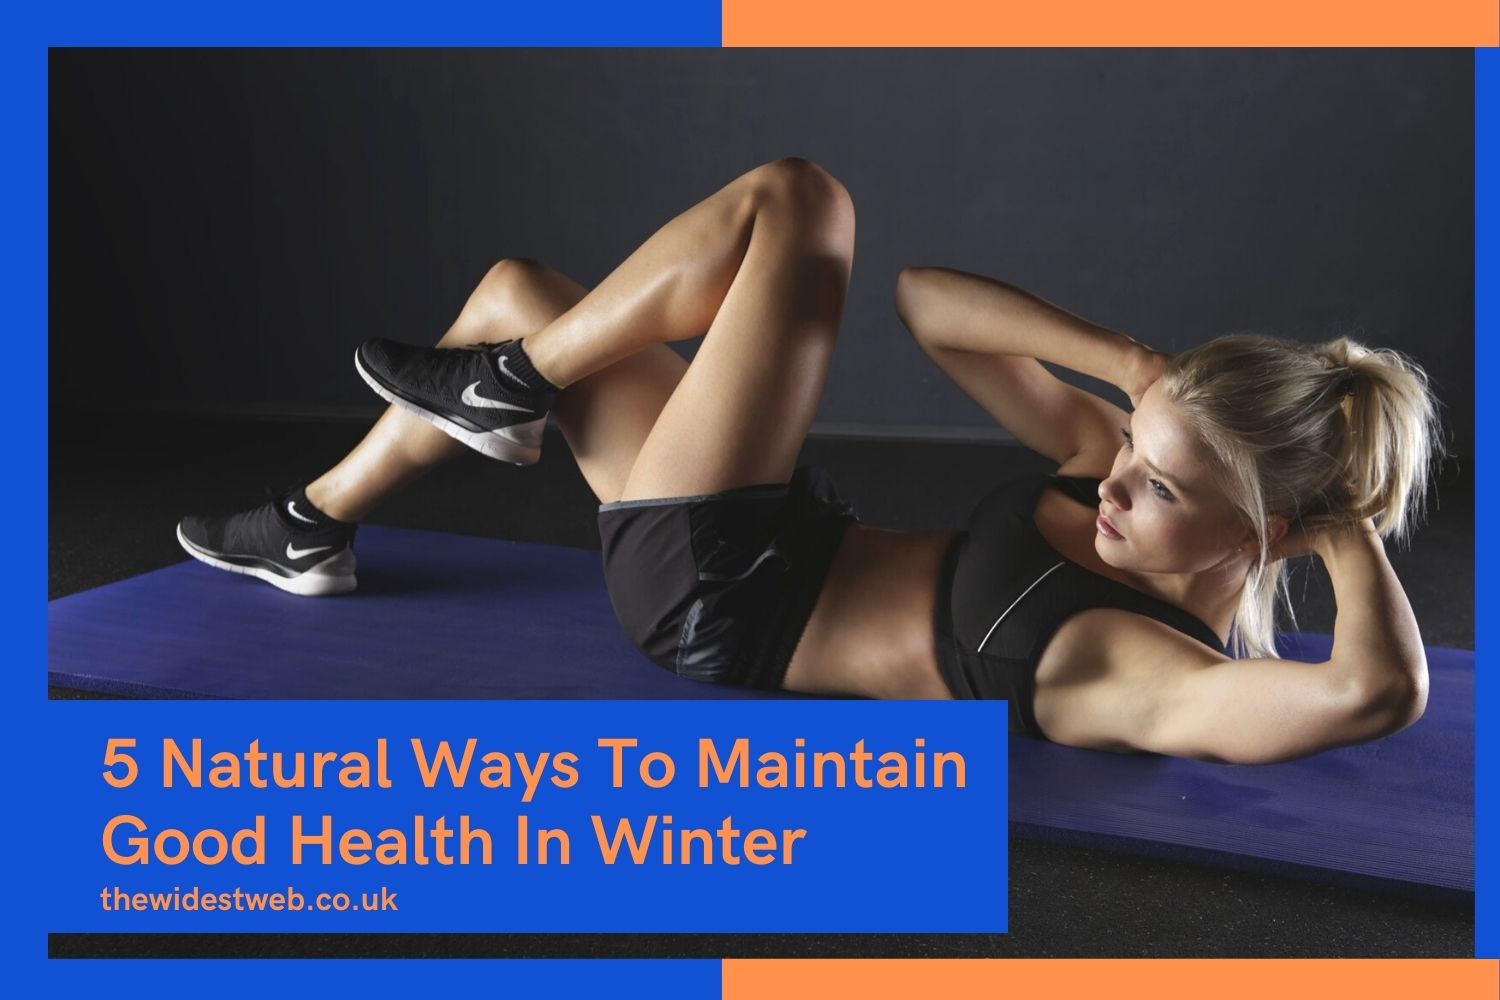 5 Natural Ways To Maintain Good Health Through The Winter